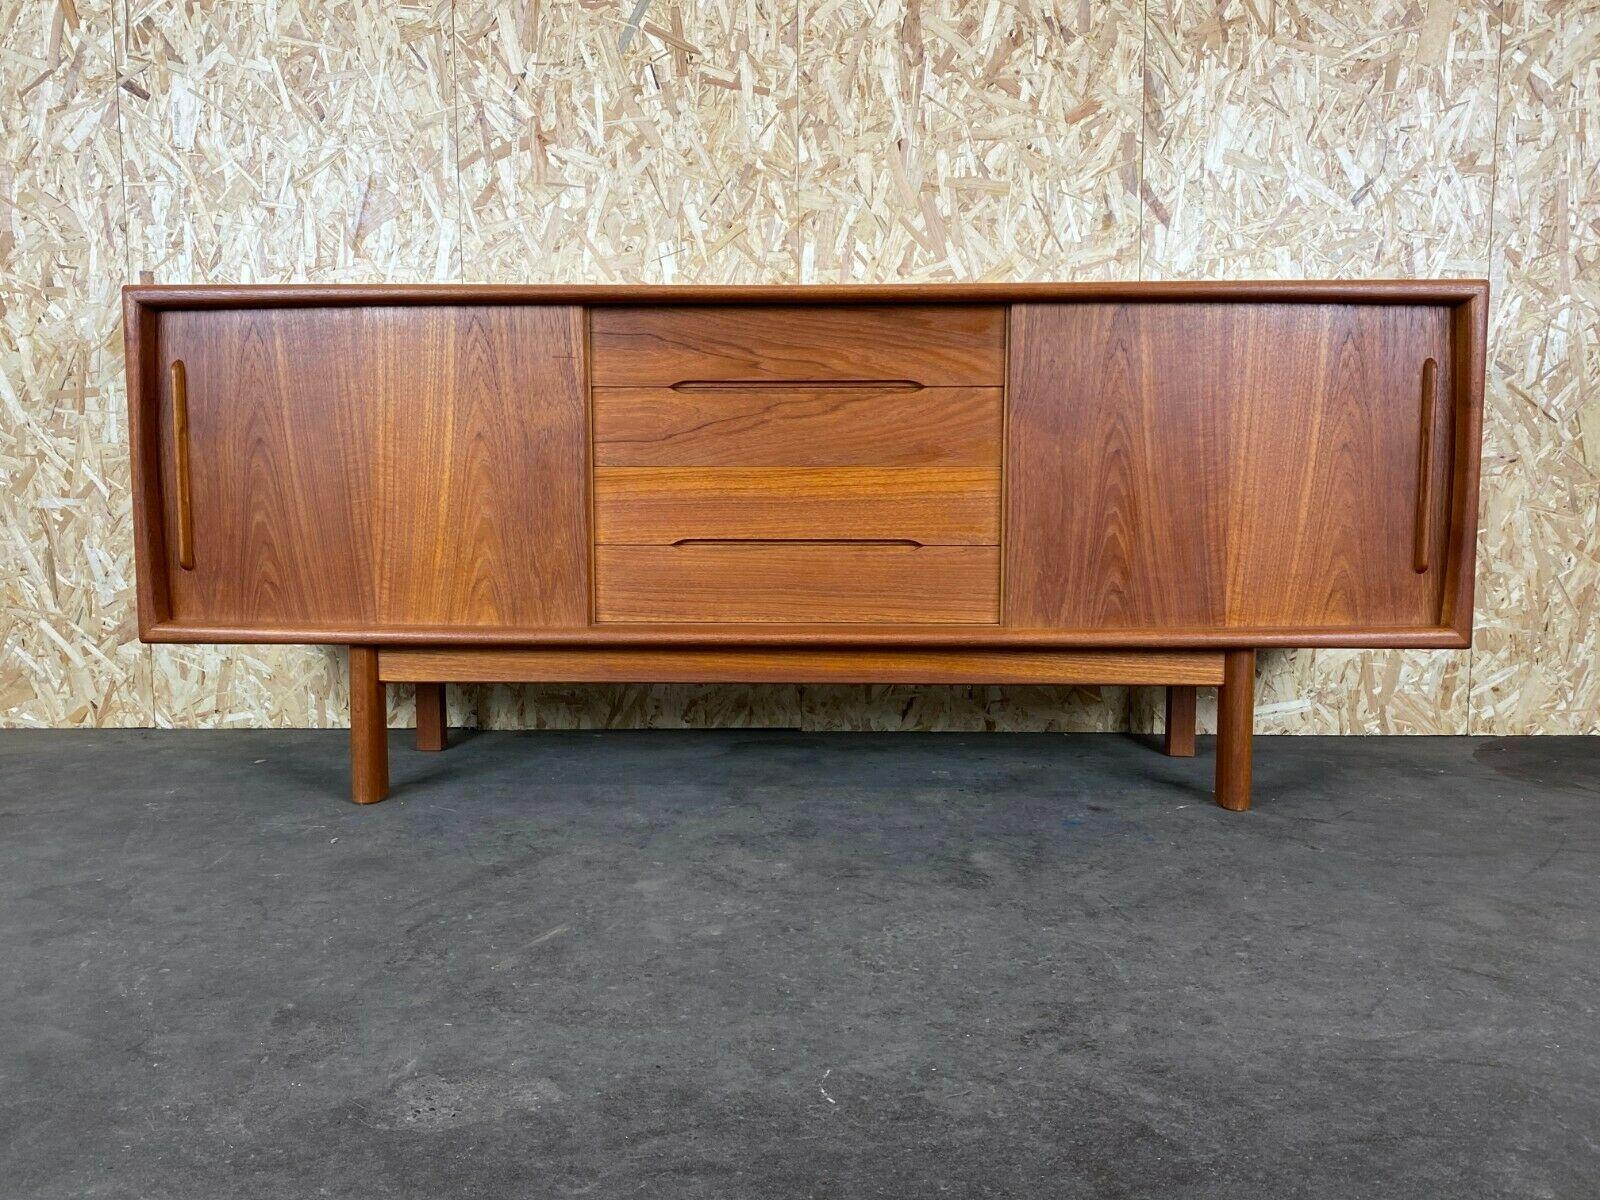 60s 70s teak sideboard Credenza H.P Hansen Danish Design Denmark 60s 70s

Object: sideboard

Manufacturer: HP Hansen

Condition: good

Age: around 1960-1970

Dimensions:

200cm x 51cm x 80cm

Other notes:

The pictures serve as part